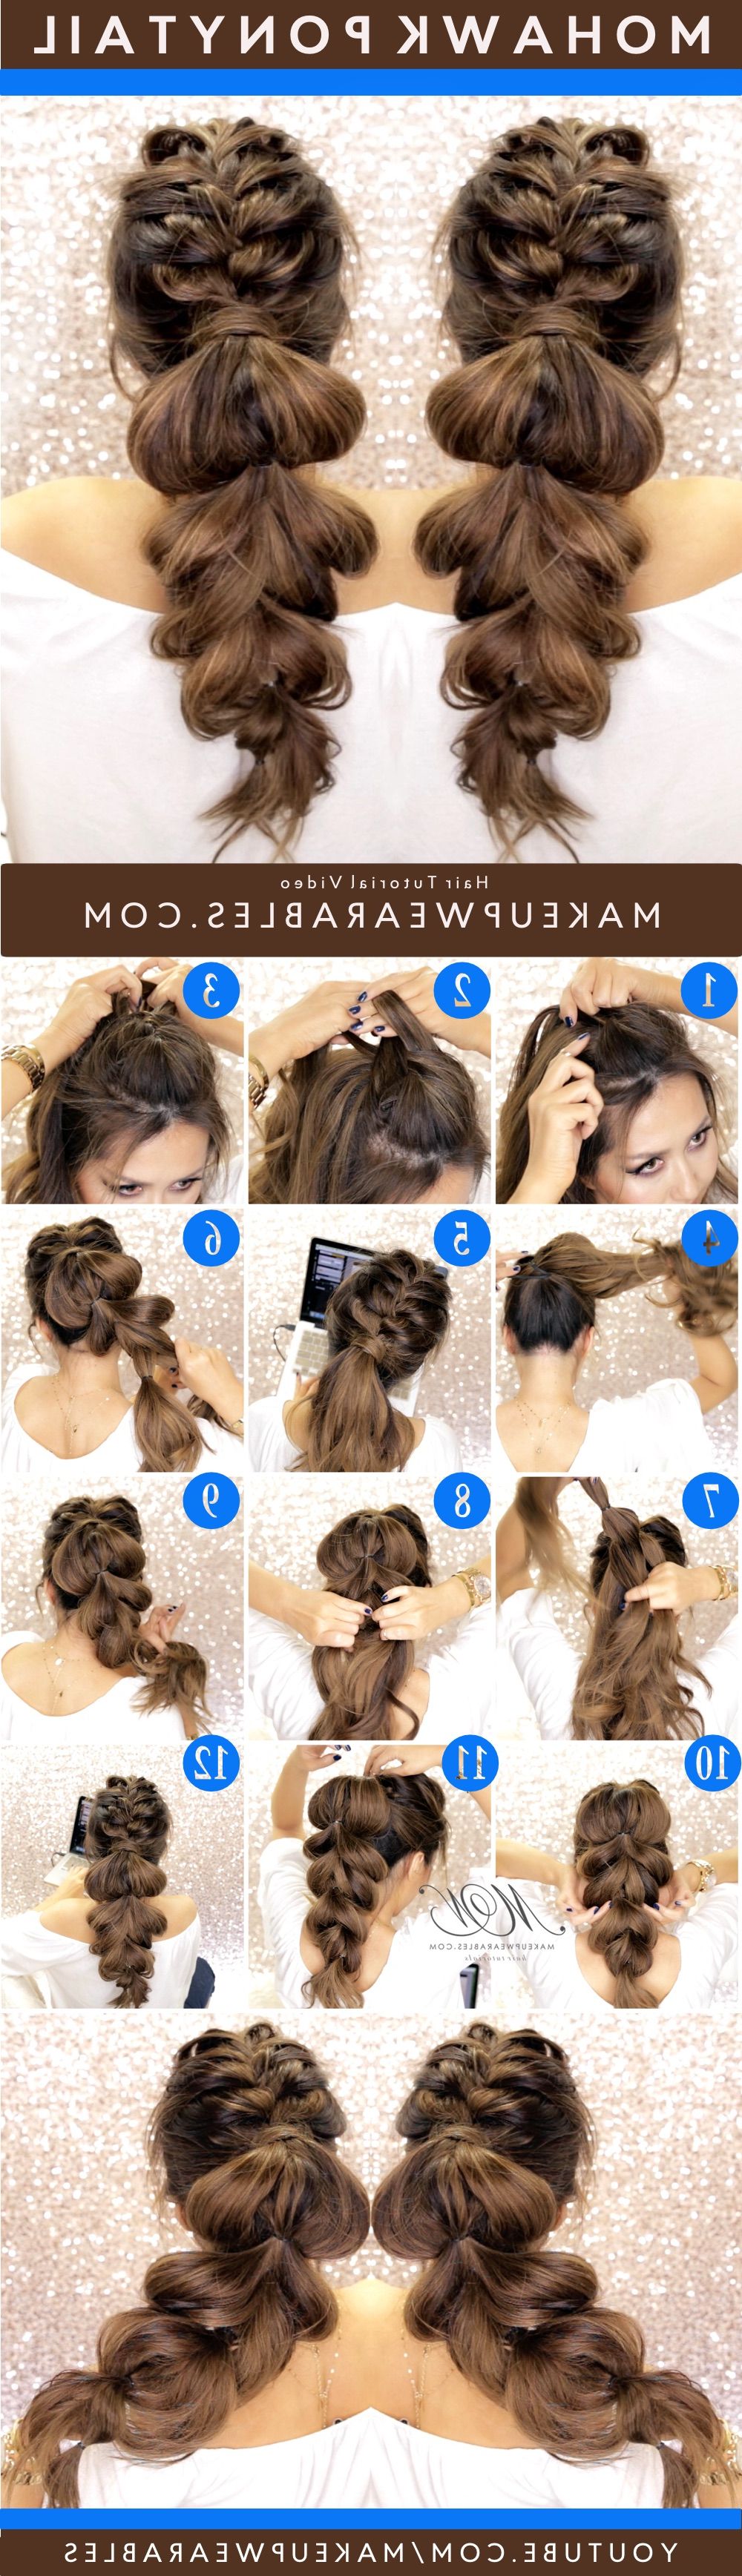 Most Romantic Mohawk Braid Ever! (View 9 of 20)